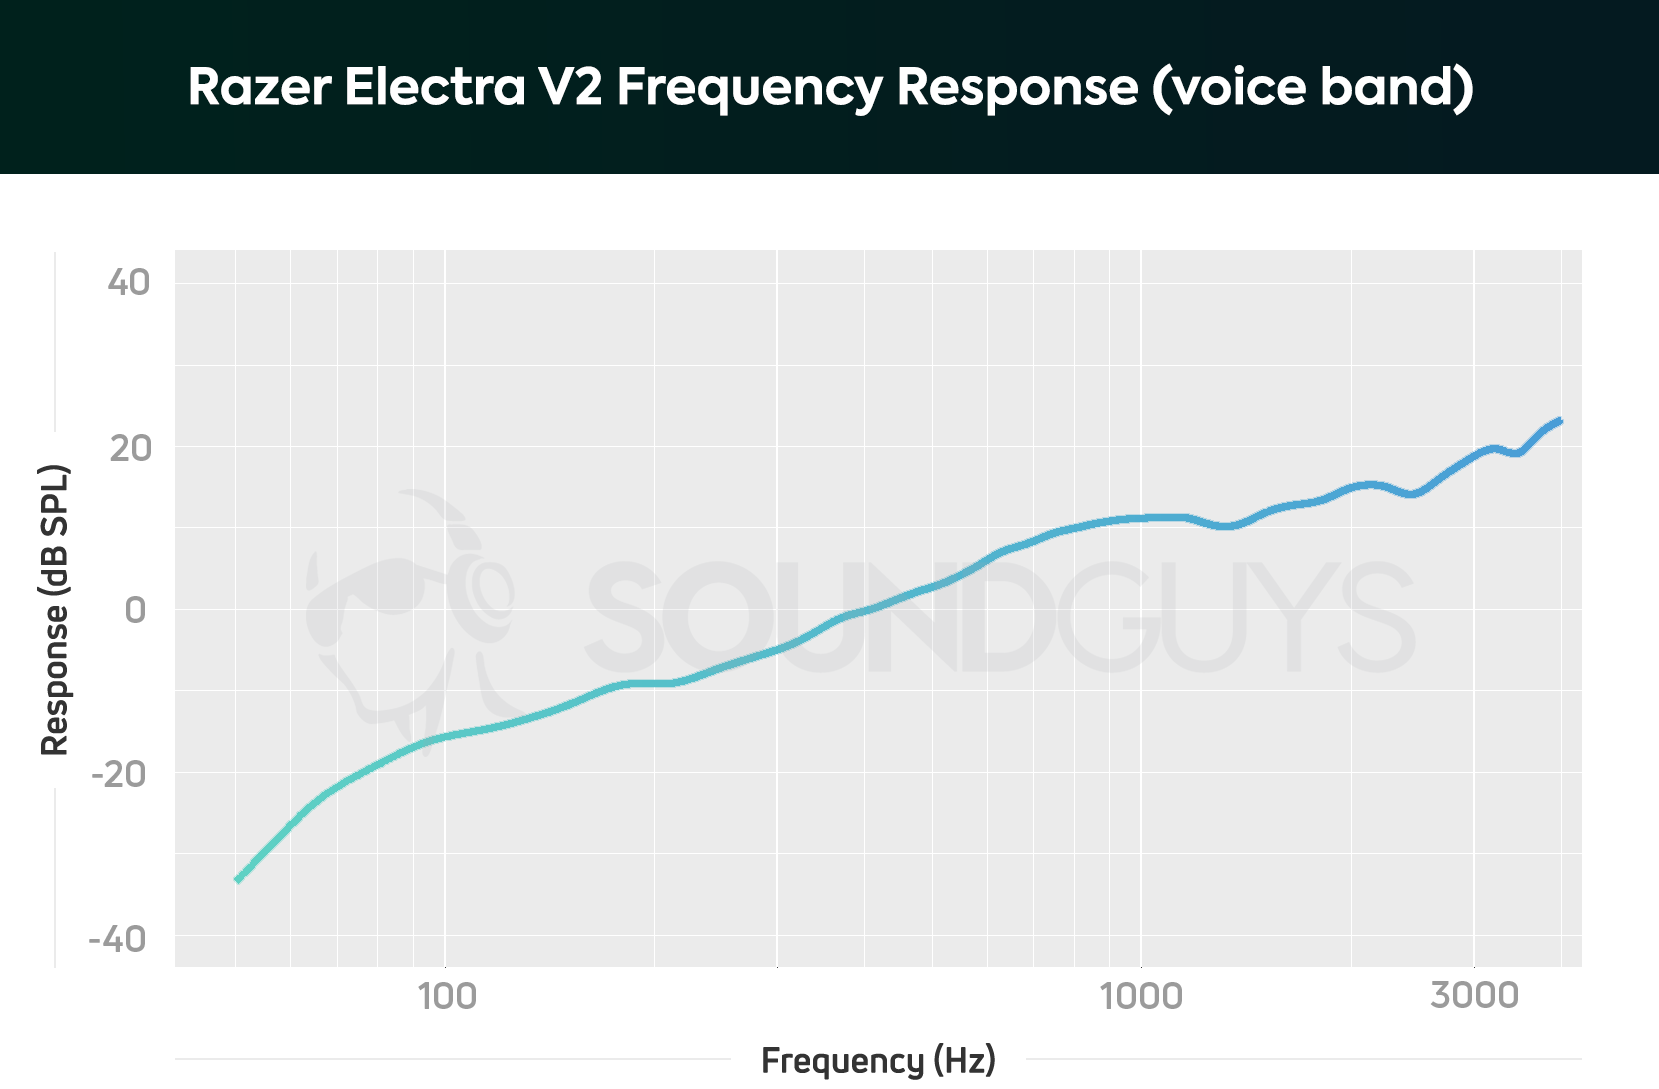 Razer Electra V2 microphone frequency response chart